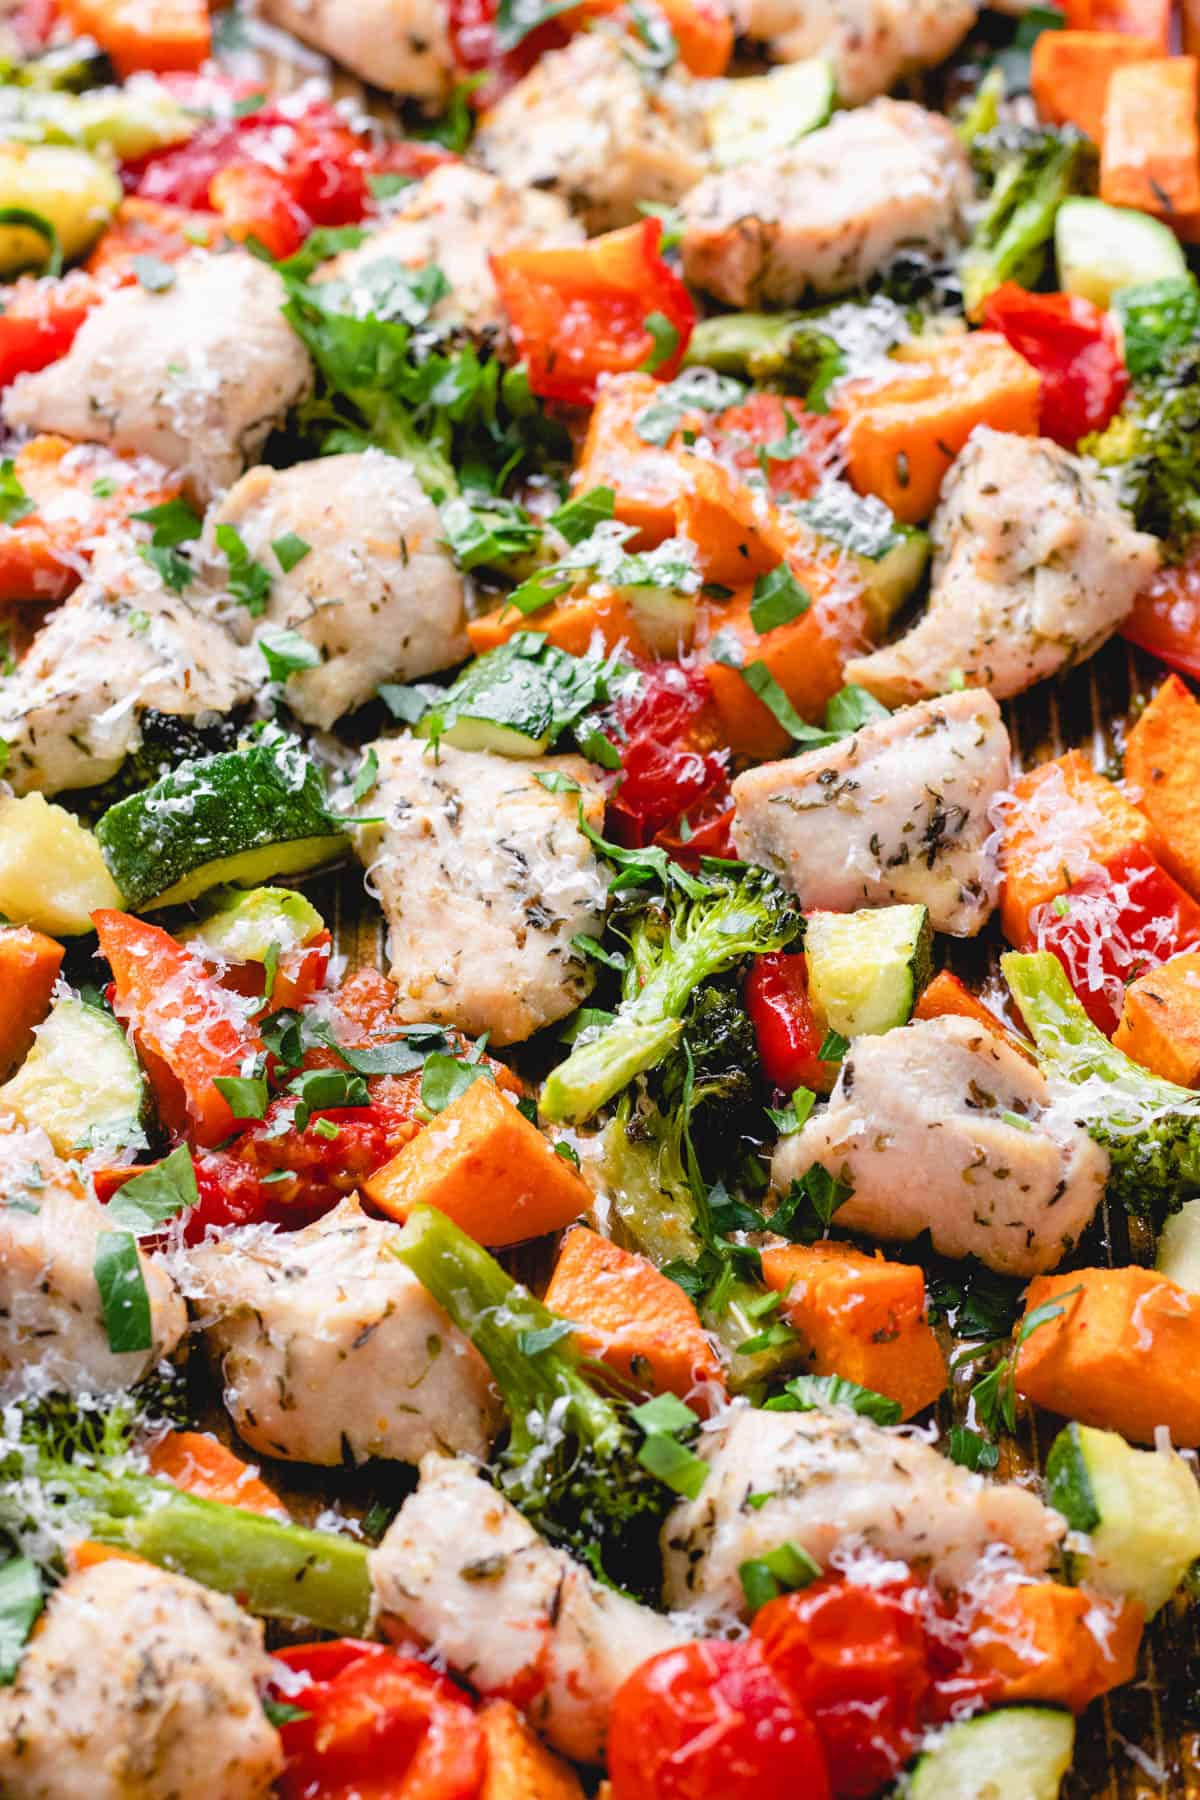 Baked diced chicken breast, sweet potatoes, broccoli, zucchini, bell pepper, and cherry tomatoes on a baking sheet topped with grated Parmesan cheese and herbs.